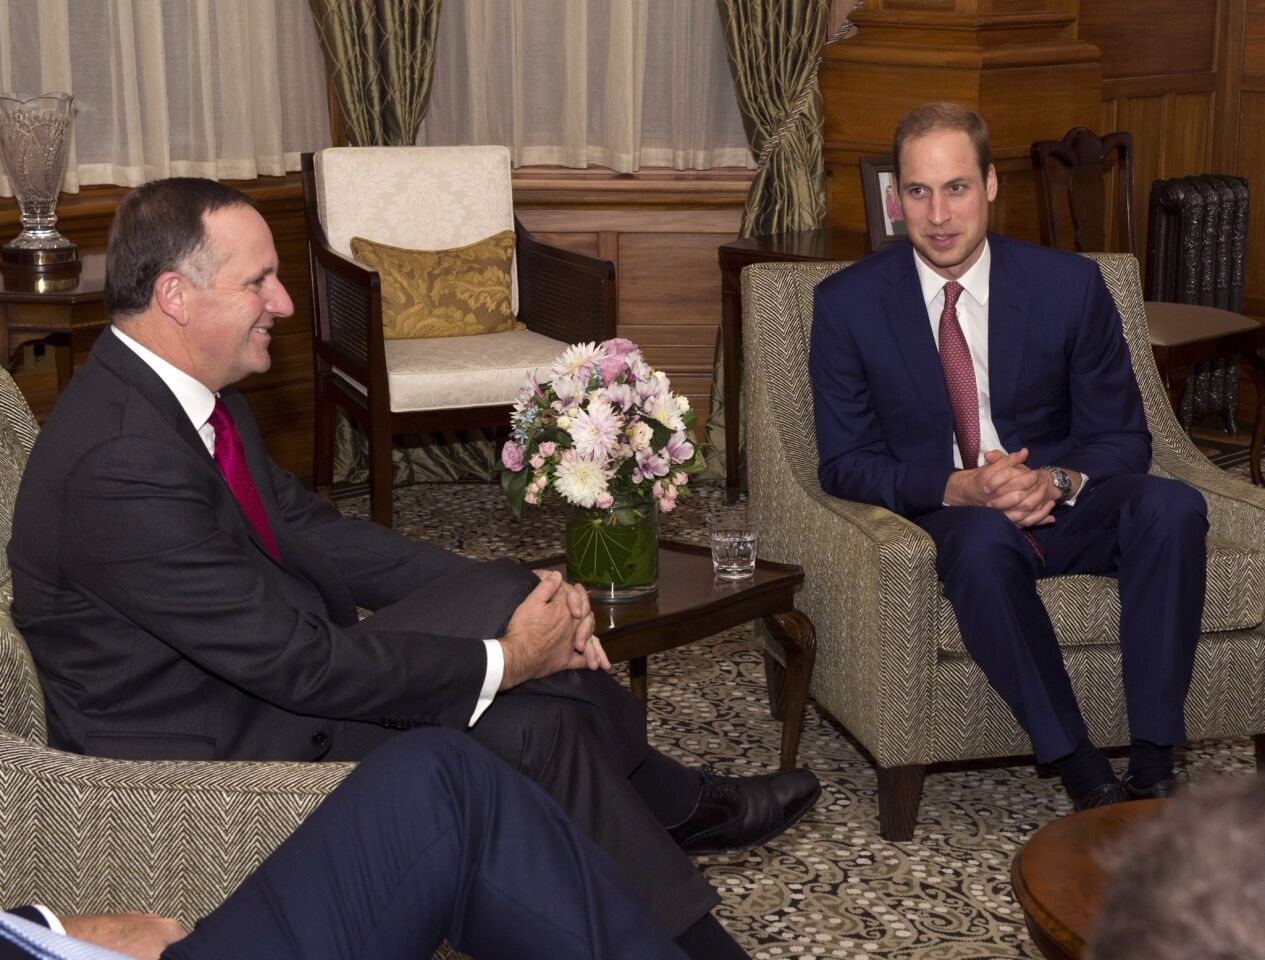 New Zealand Prime Minister John Key, left, meets with Prince William during the royal tour of New Zealand.